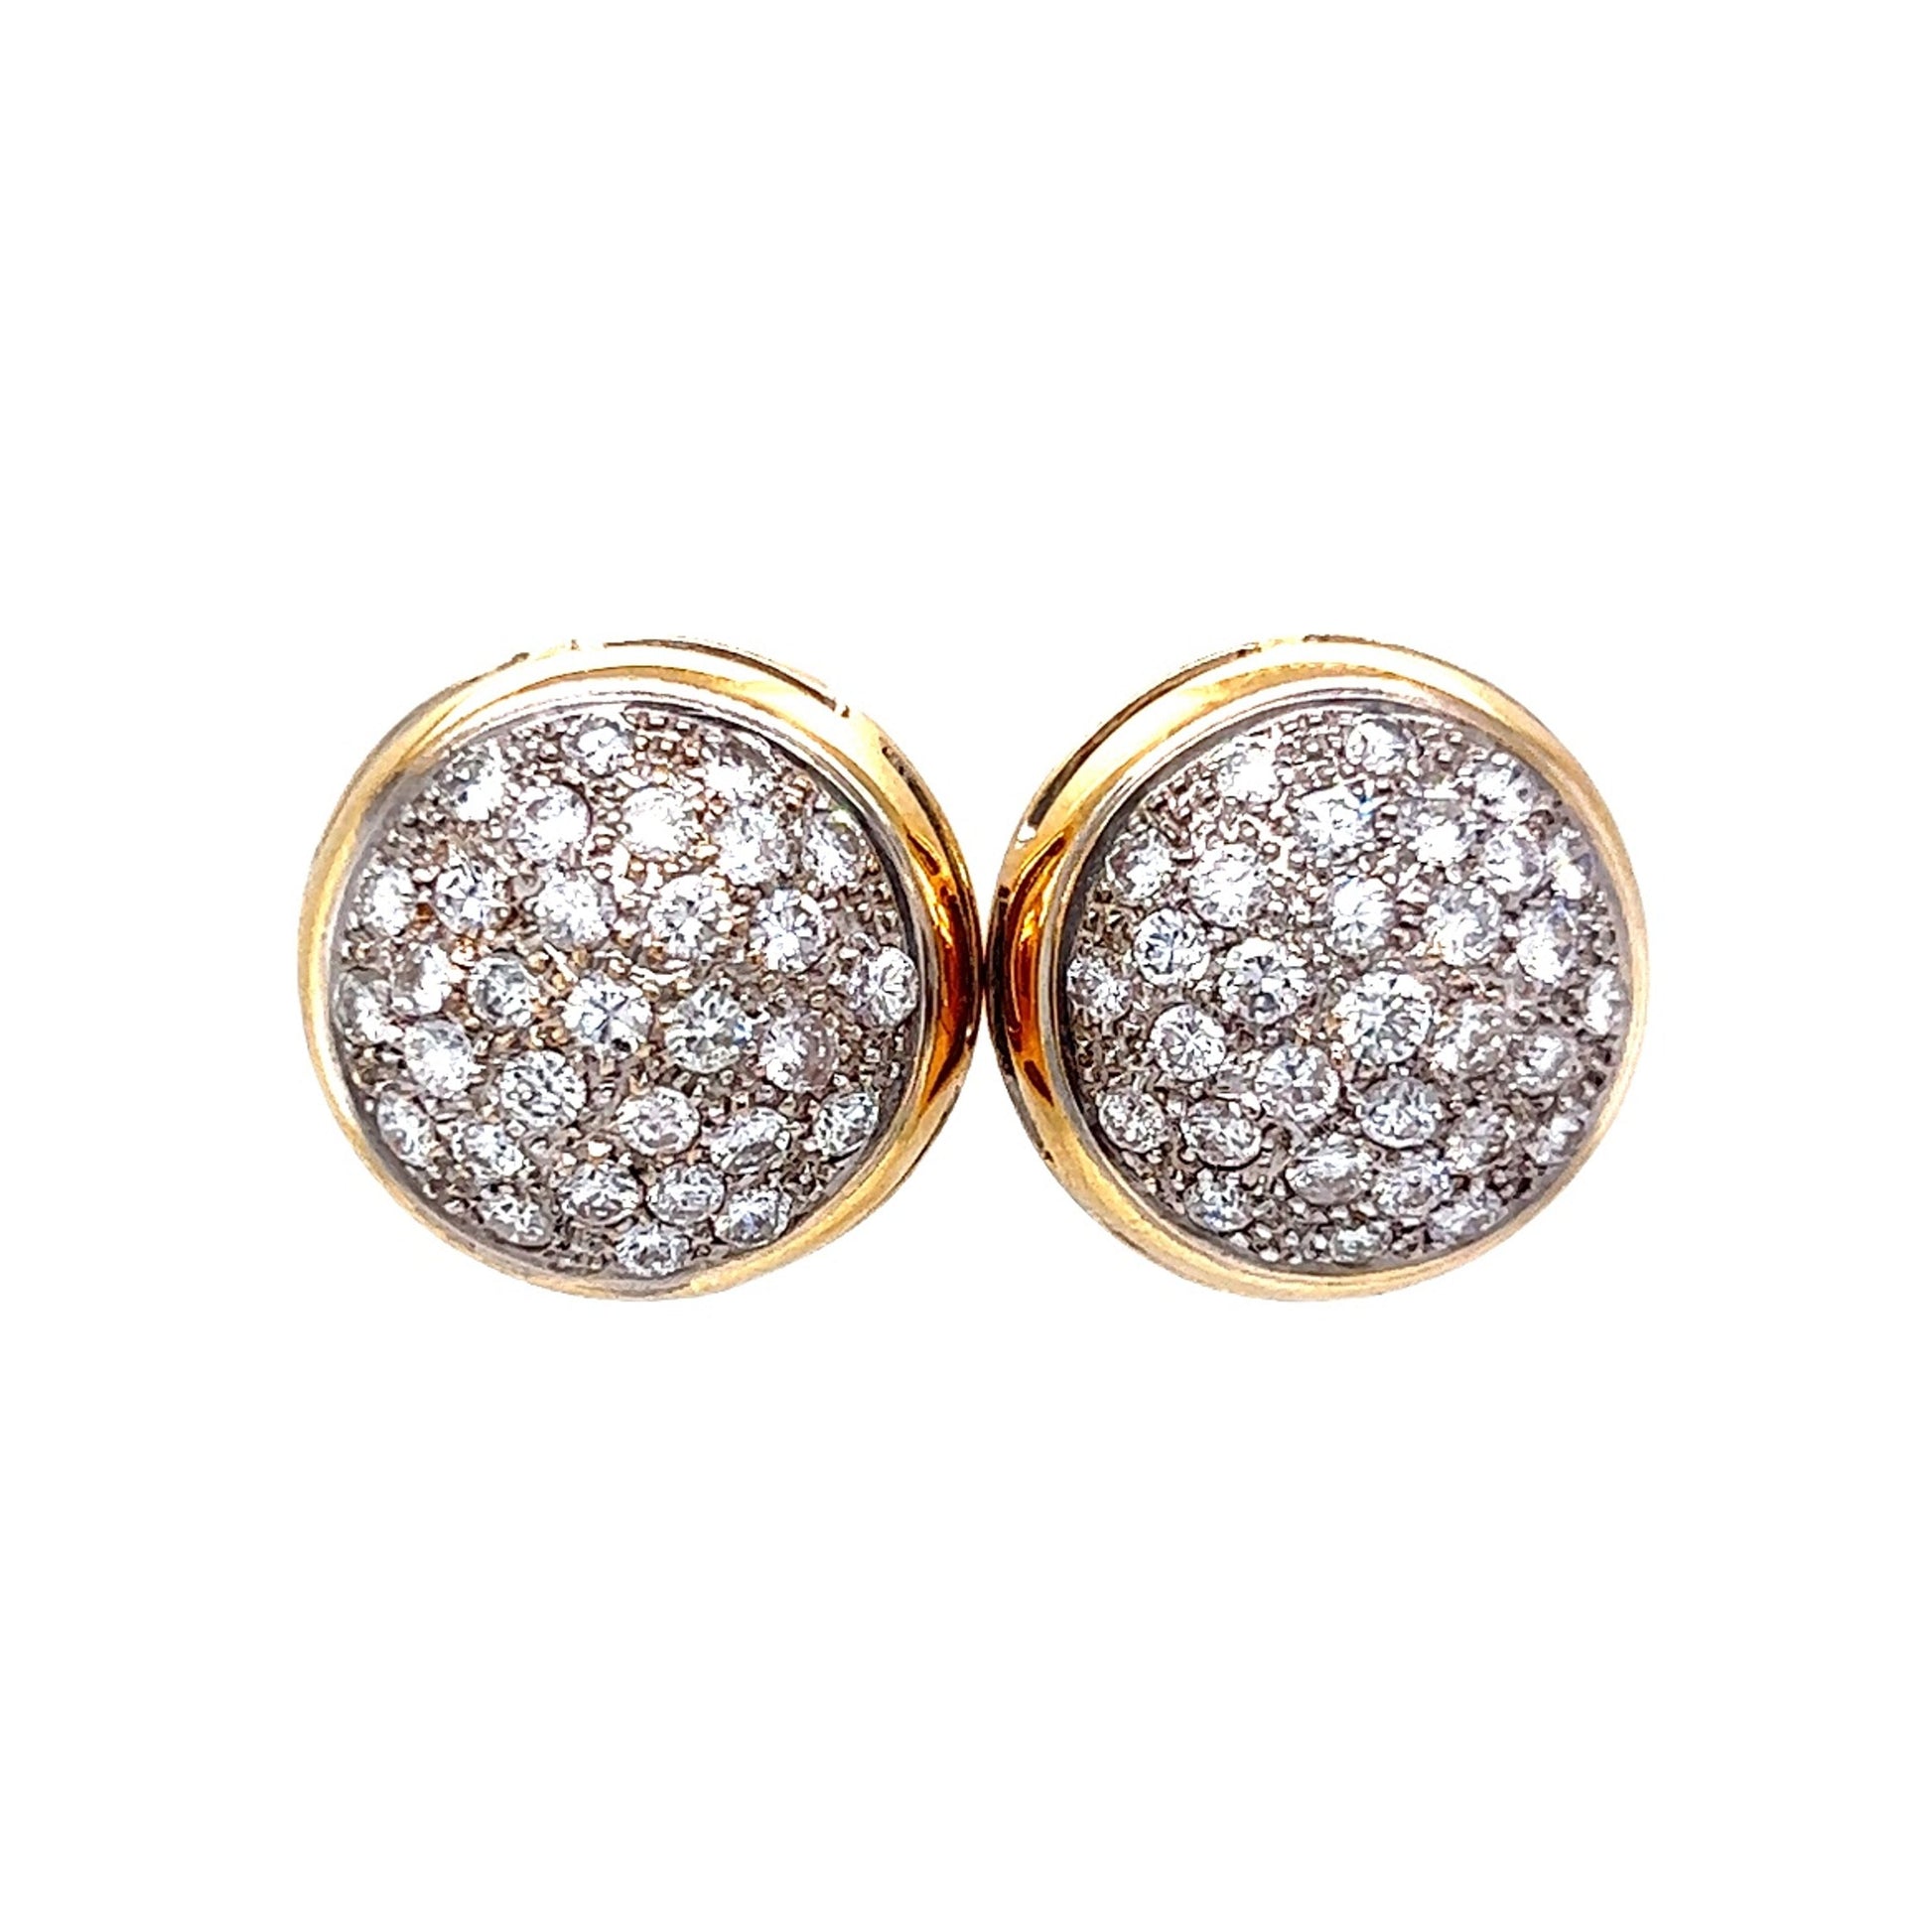 2.00 Pave Cluster Diamond Earrings 14K Yellow and White Gold